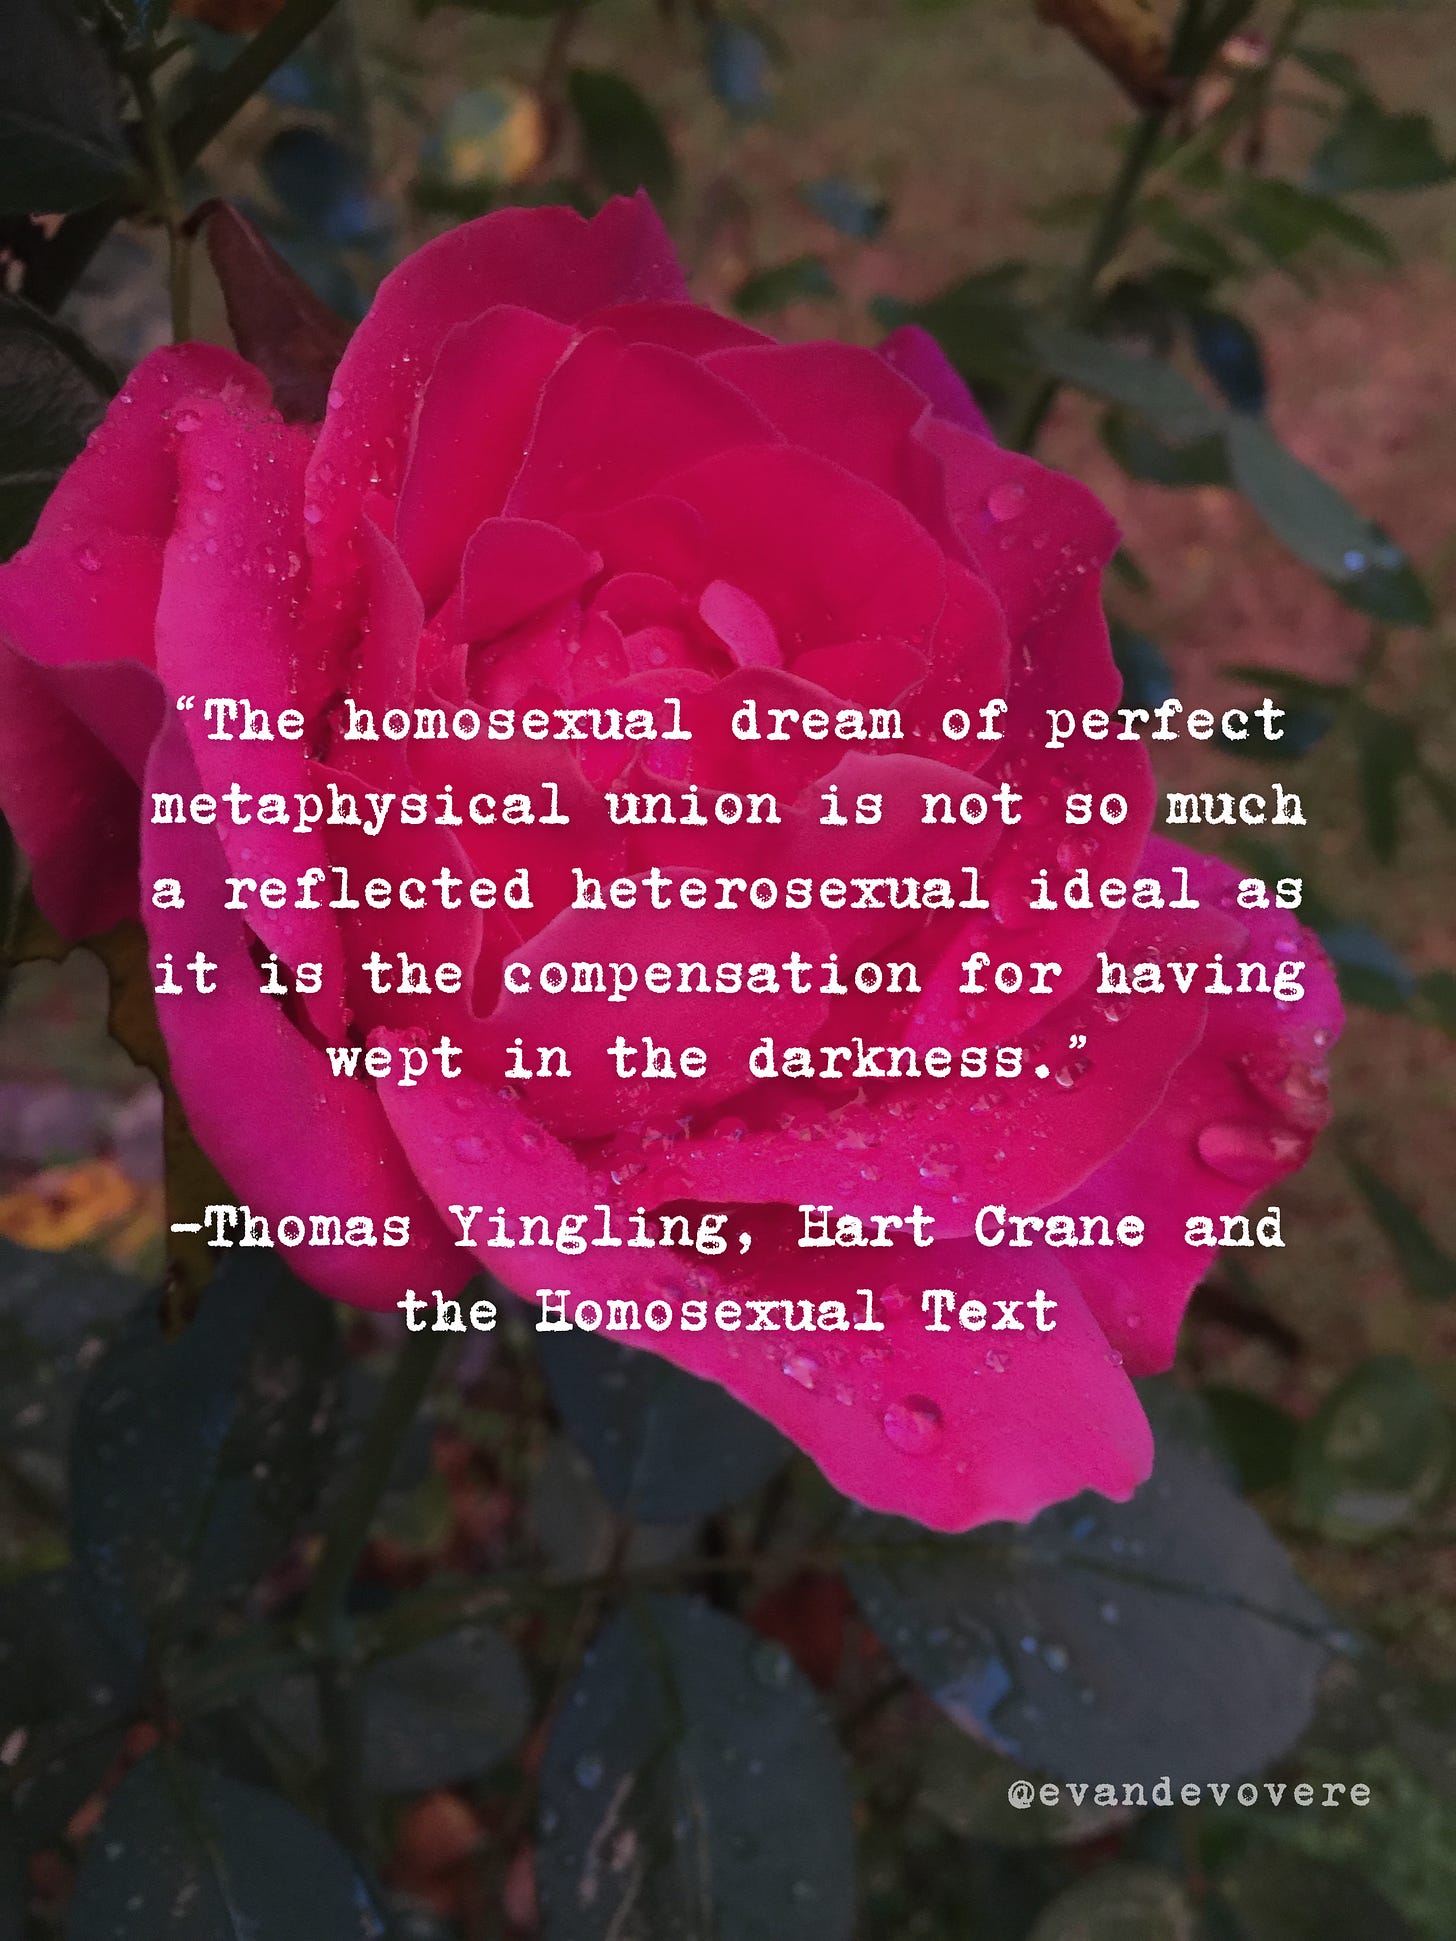 Image of a vibrant pink rose in golden hour light just after a summer rain. Text overlay on image says “The homosexual dream of perfect metaphysical union is not so much a reflected heterosexual ideal as it is the compensation for having wept in the darkness.” -Thomas Yingling